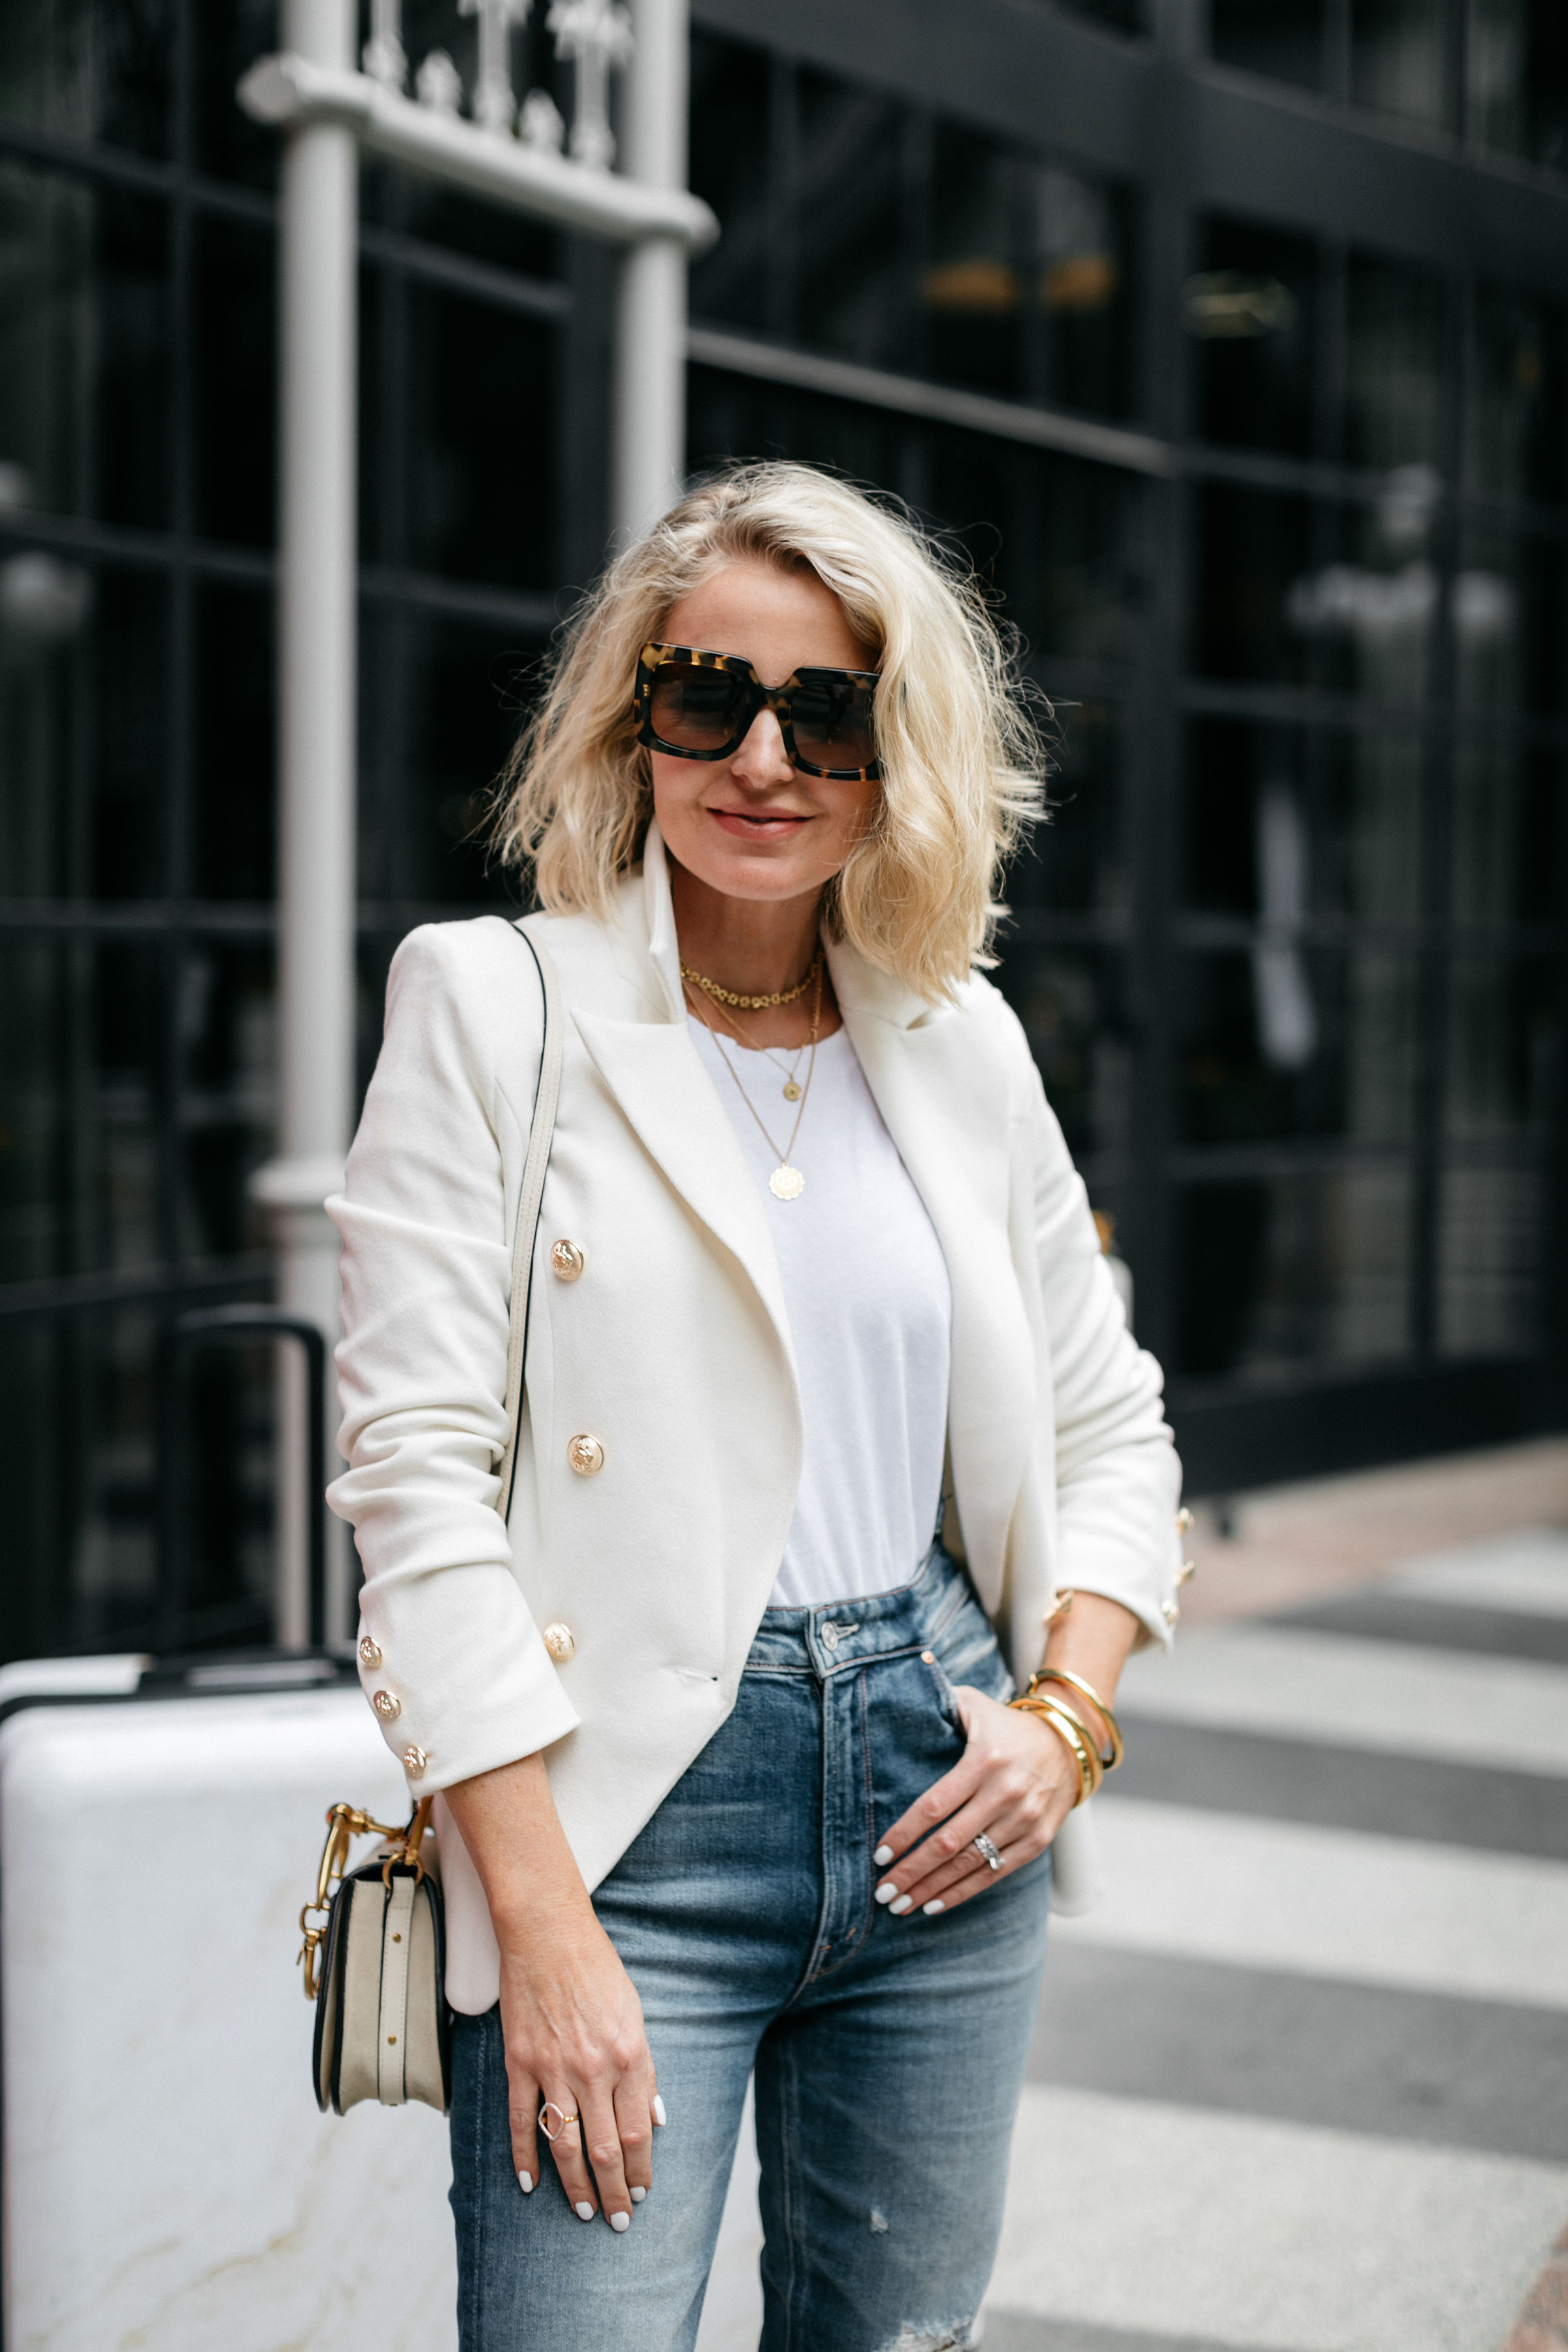 reward style Conference 2019, Fashion blogger Erin Busbee of BusbeeStyle.com wearing jeans, camo sneakers, and a white blazer in Dallas, Texas